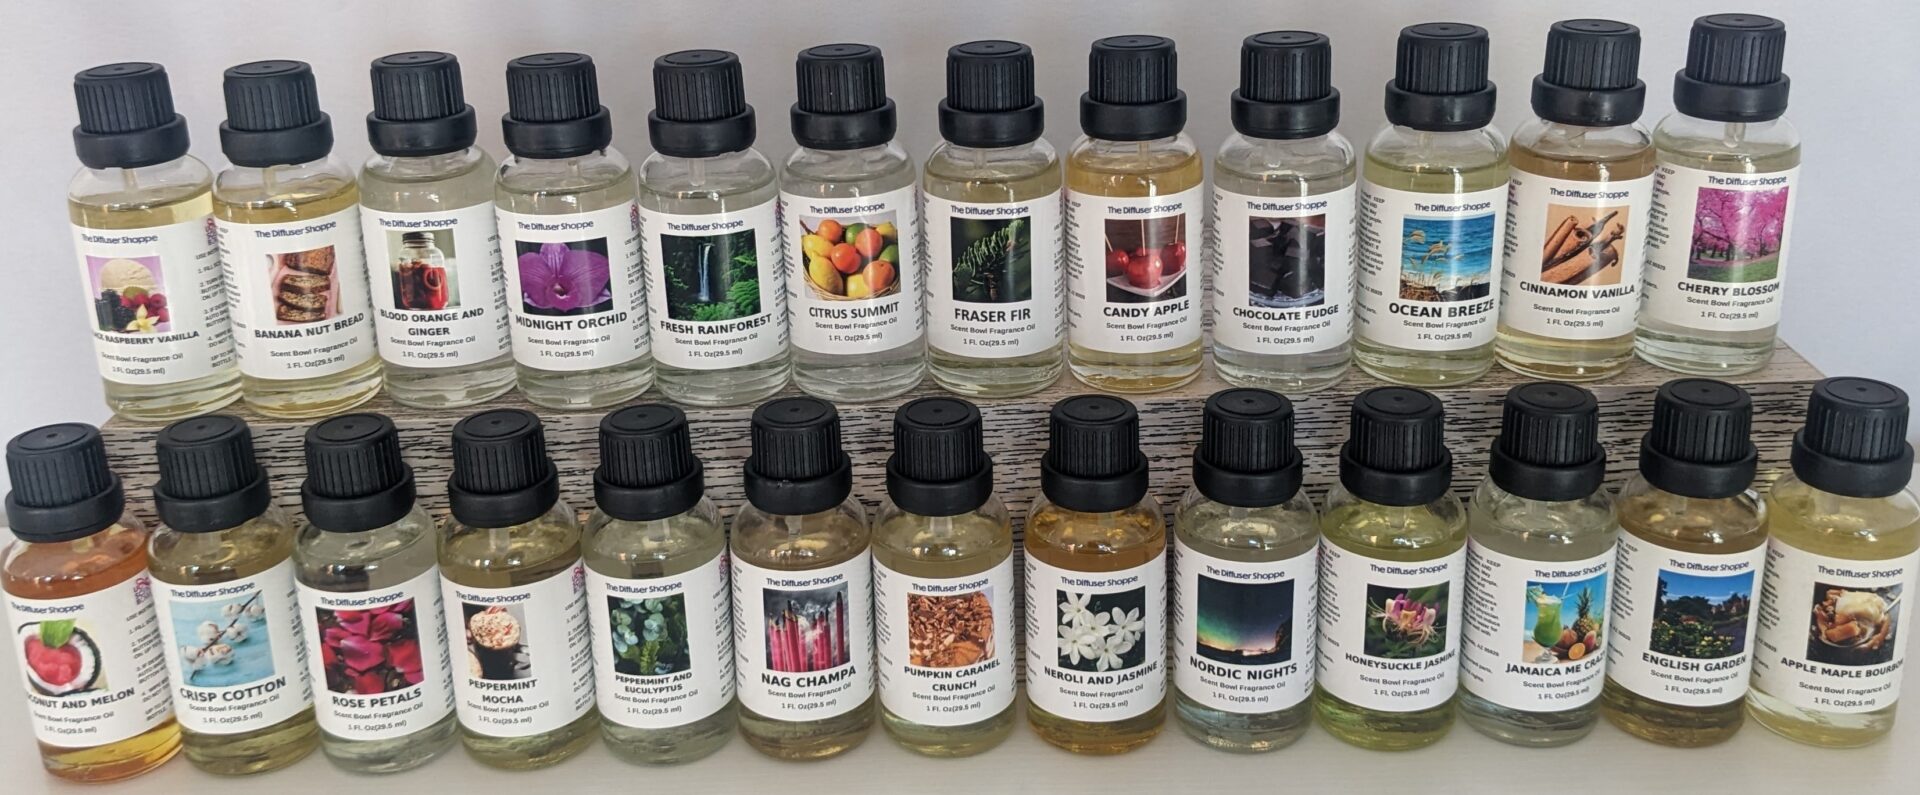 A shelf of different oils and their names.